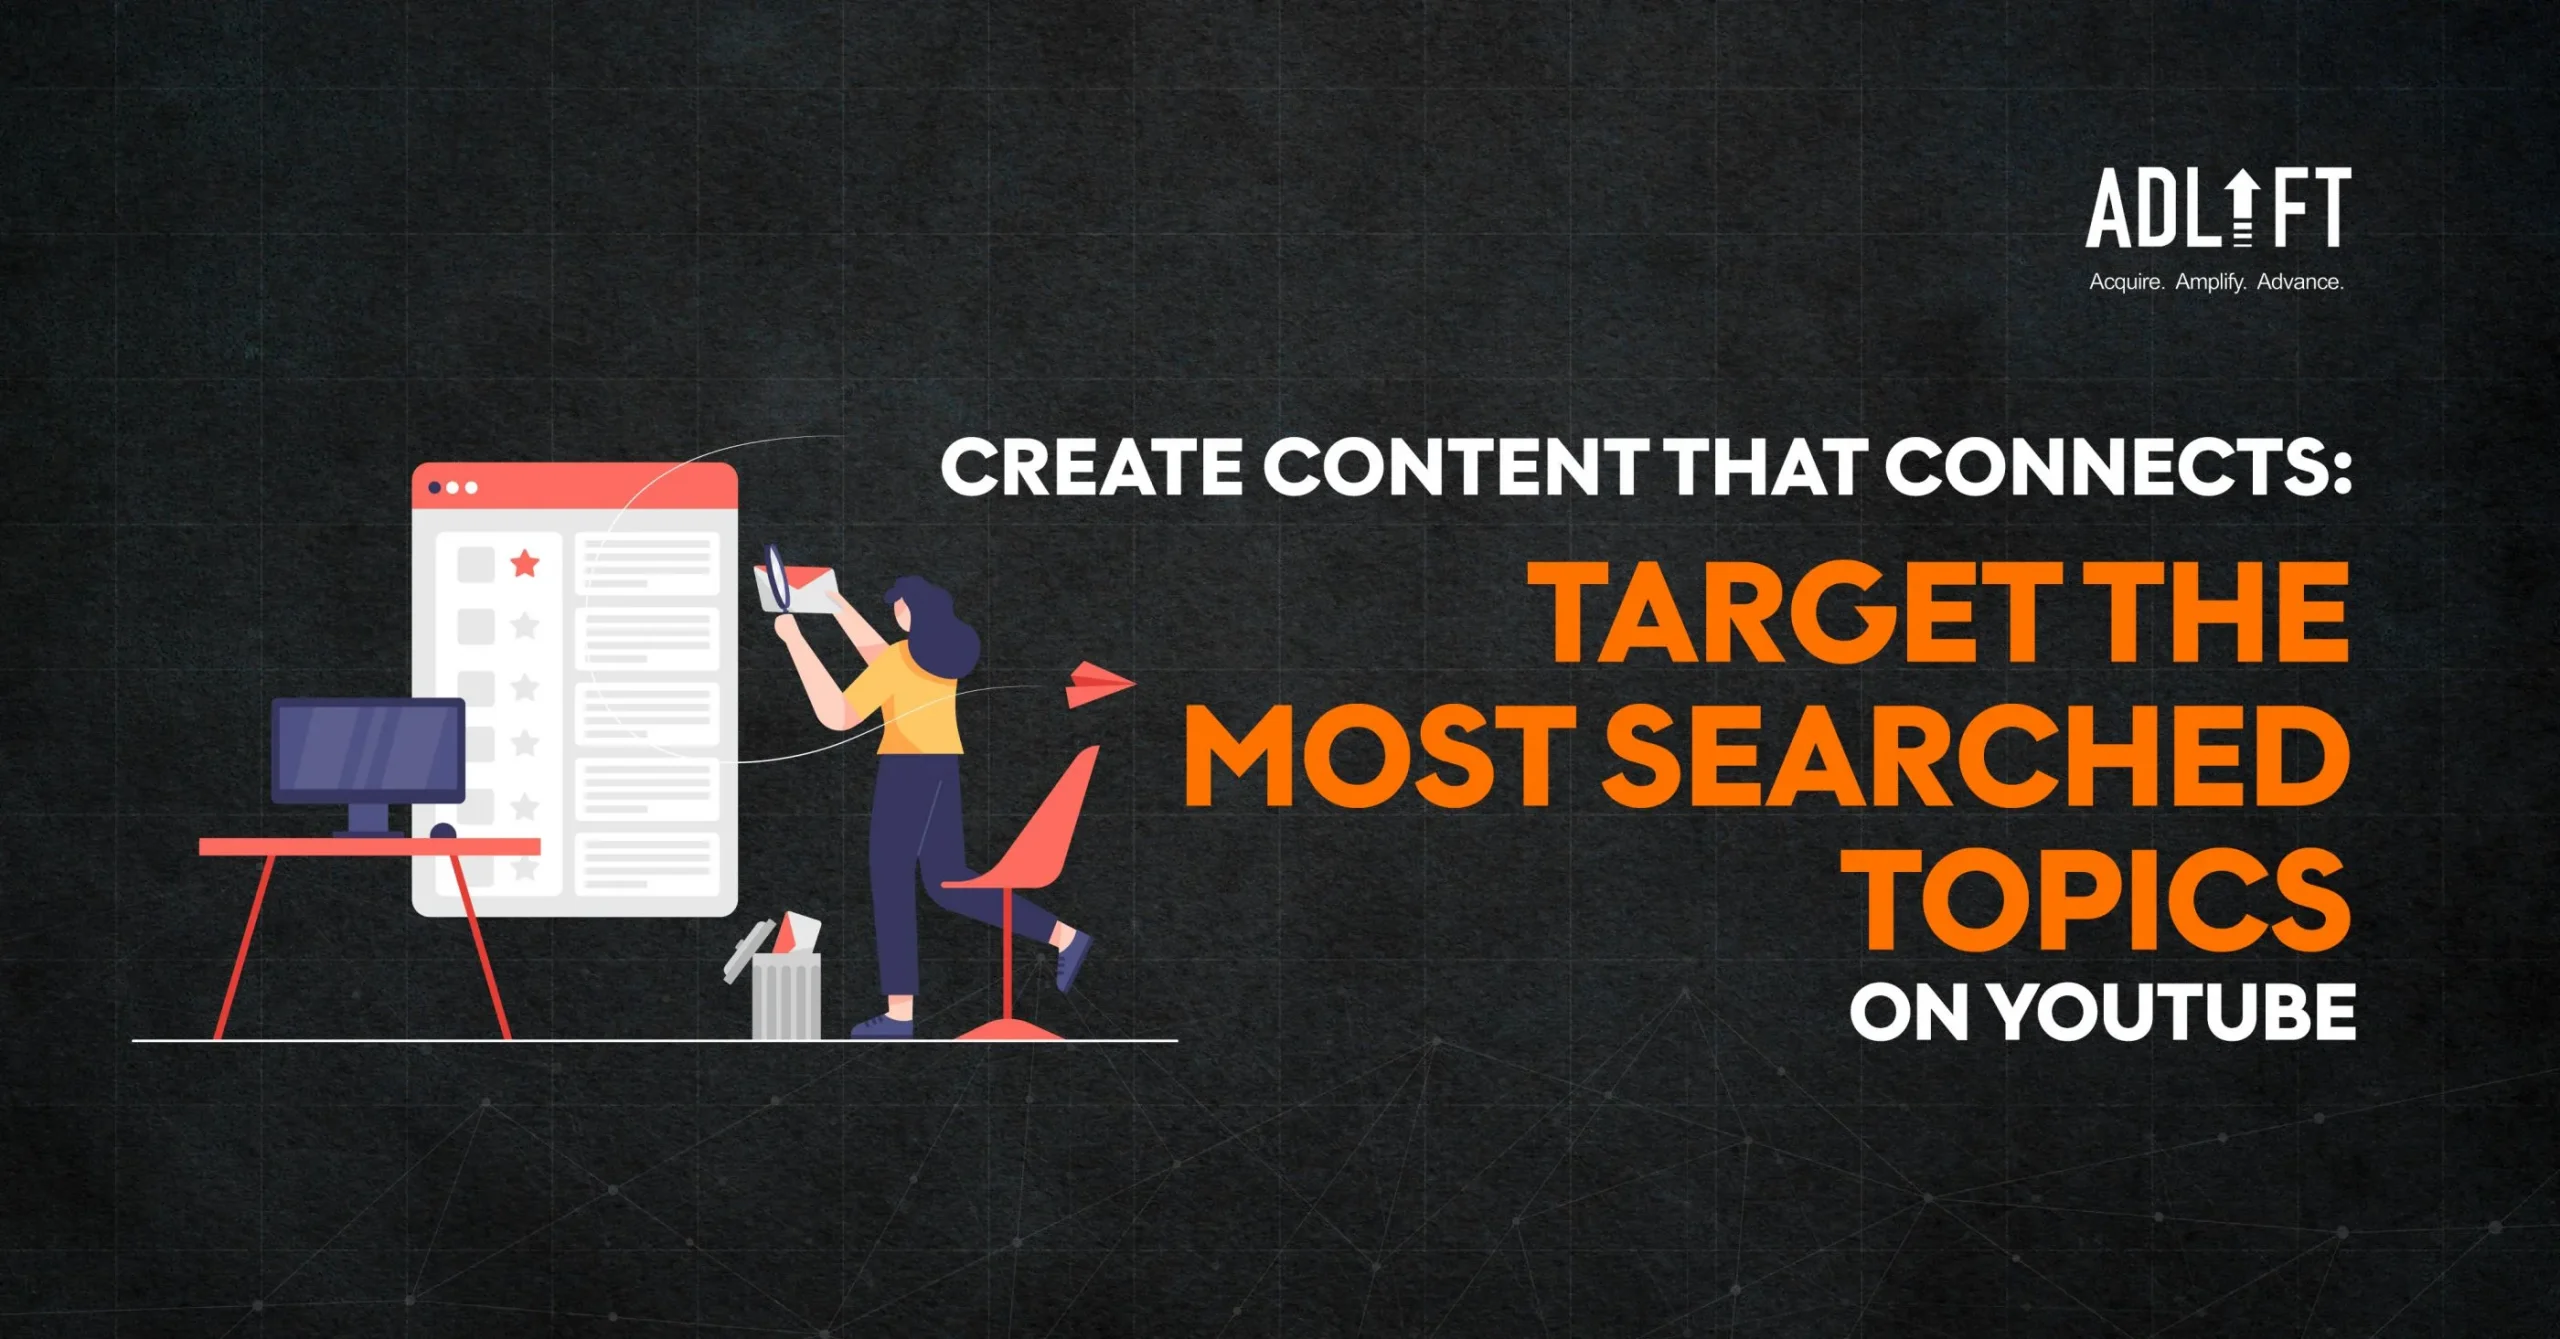 Create-Content-that-Connects-Target-the-Most-Searched-Topics-on-YouTube (1)